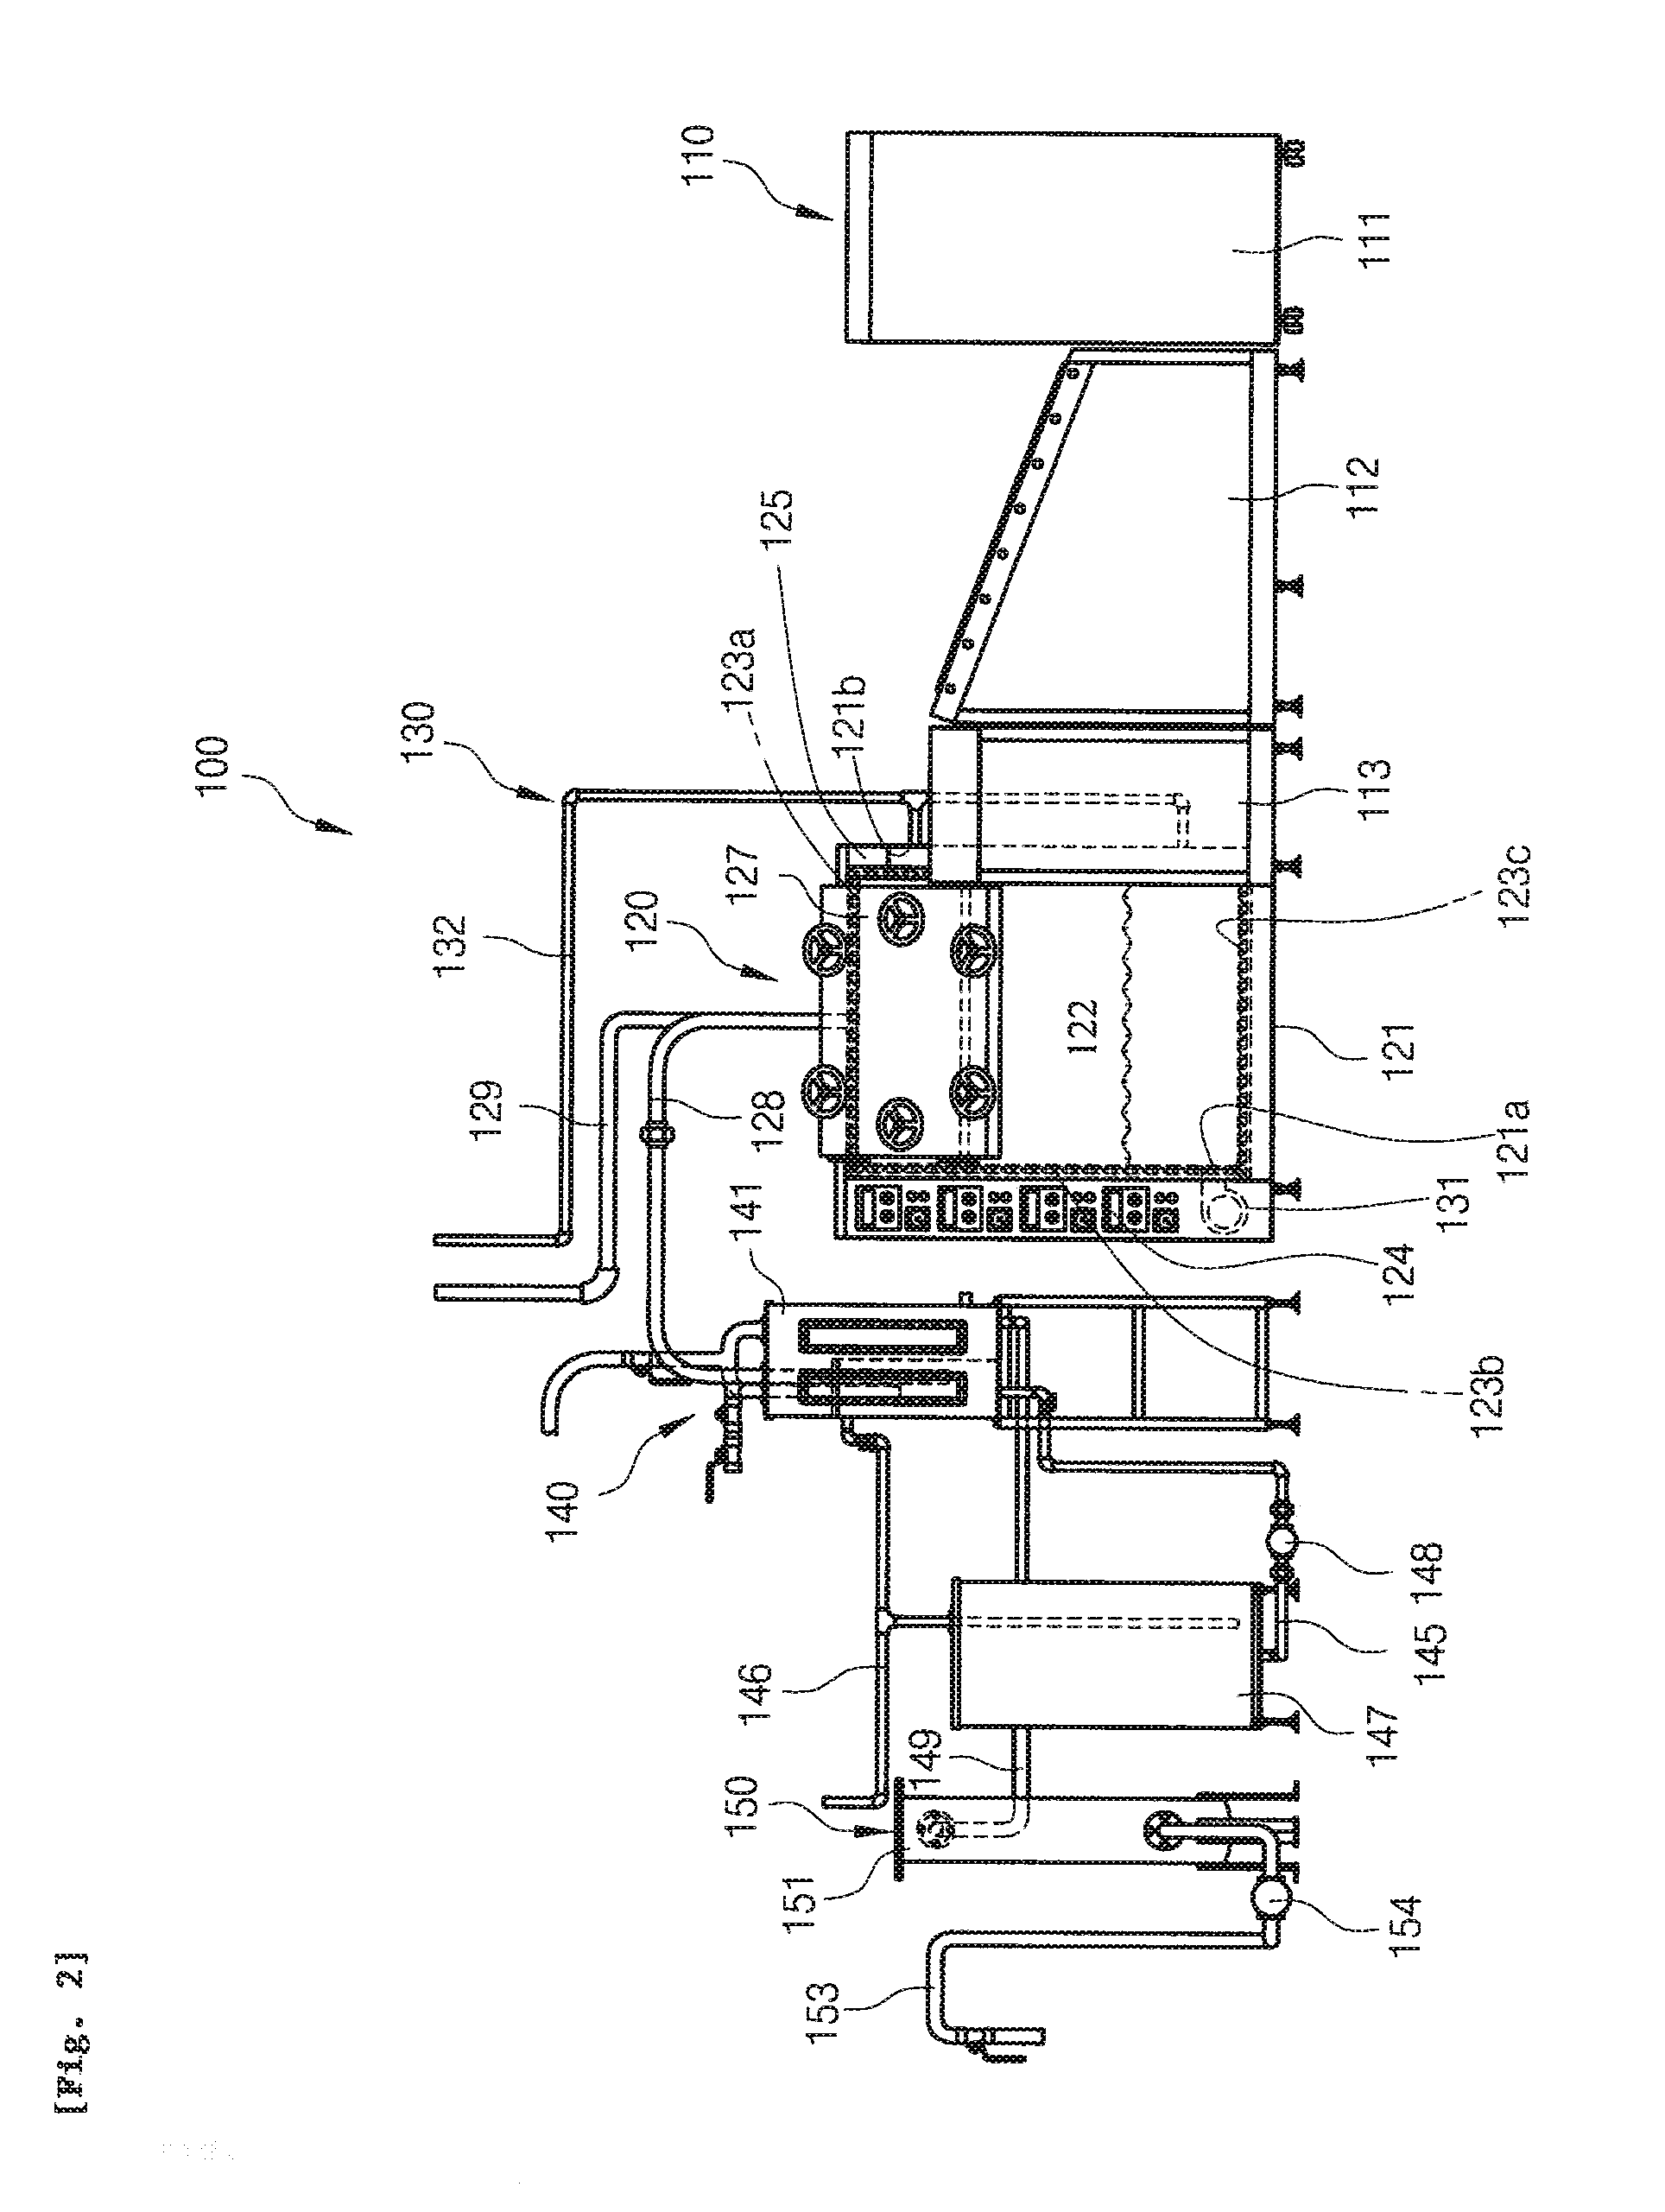 Apparatus for restoring waste plastic to oil